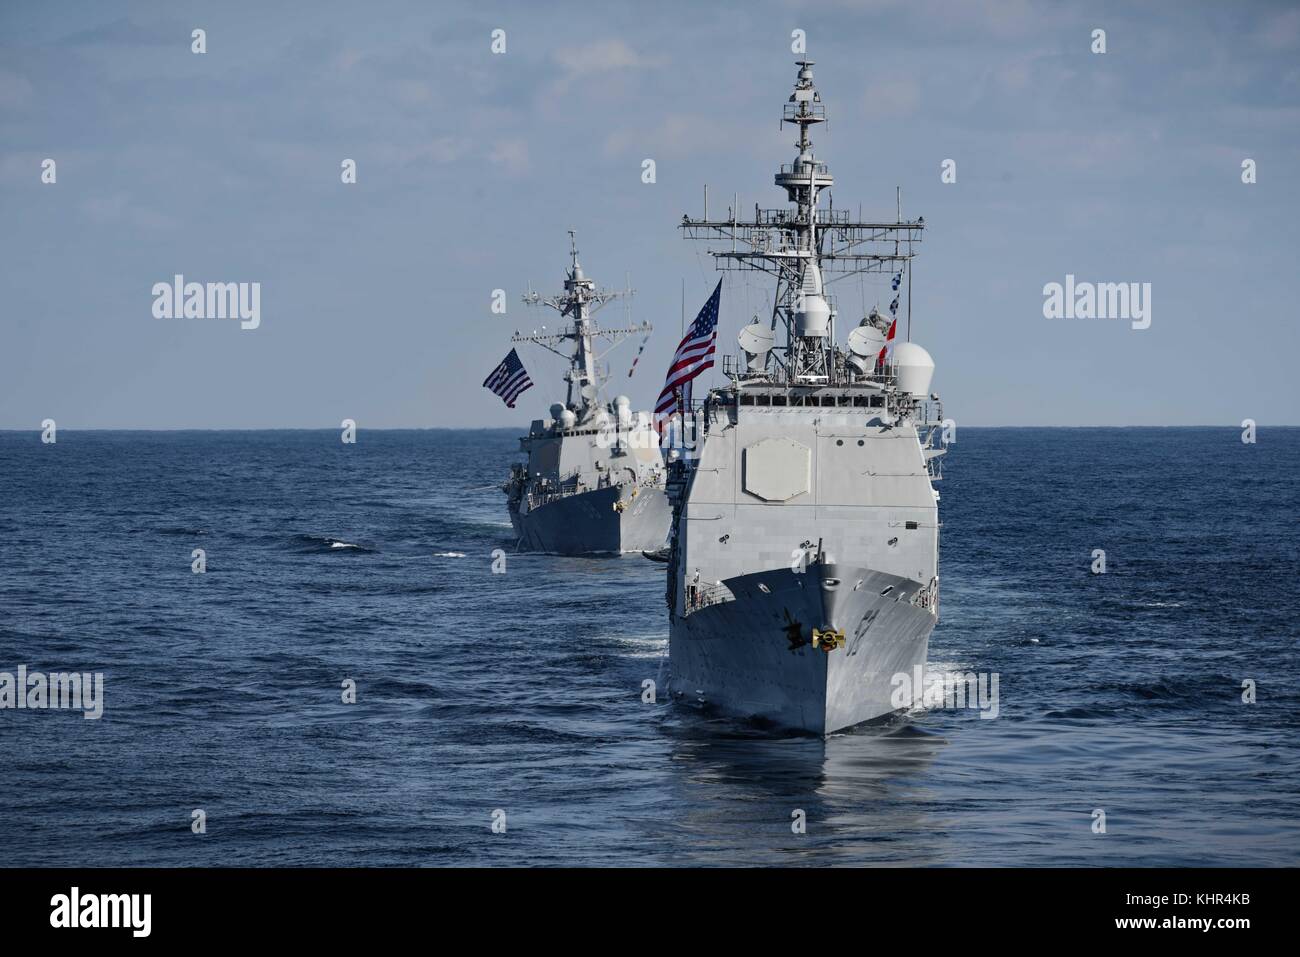 The U.S. Navy Ticonderoga-class guided-missile cruiser USS Bunker Hill (front) and the U.S. Navy Arleigh Burke-class guided-missile destroyer USS Preble steam in formation November 12, 2017 in the Pacific Ocean.  (photo by Alex Perlman via Planetpix) Stock Photo